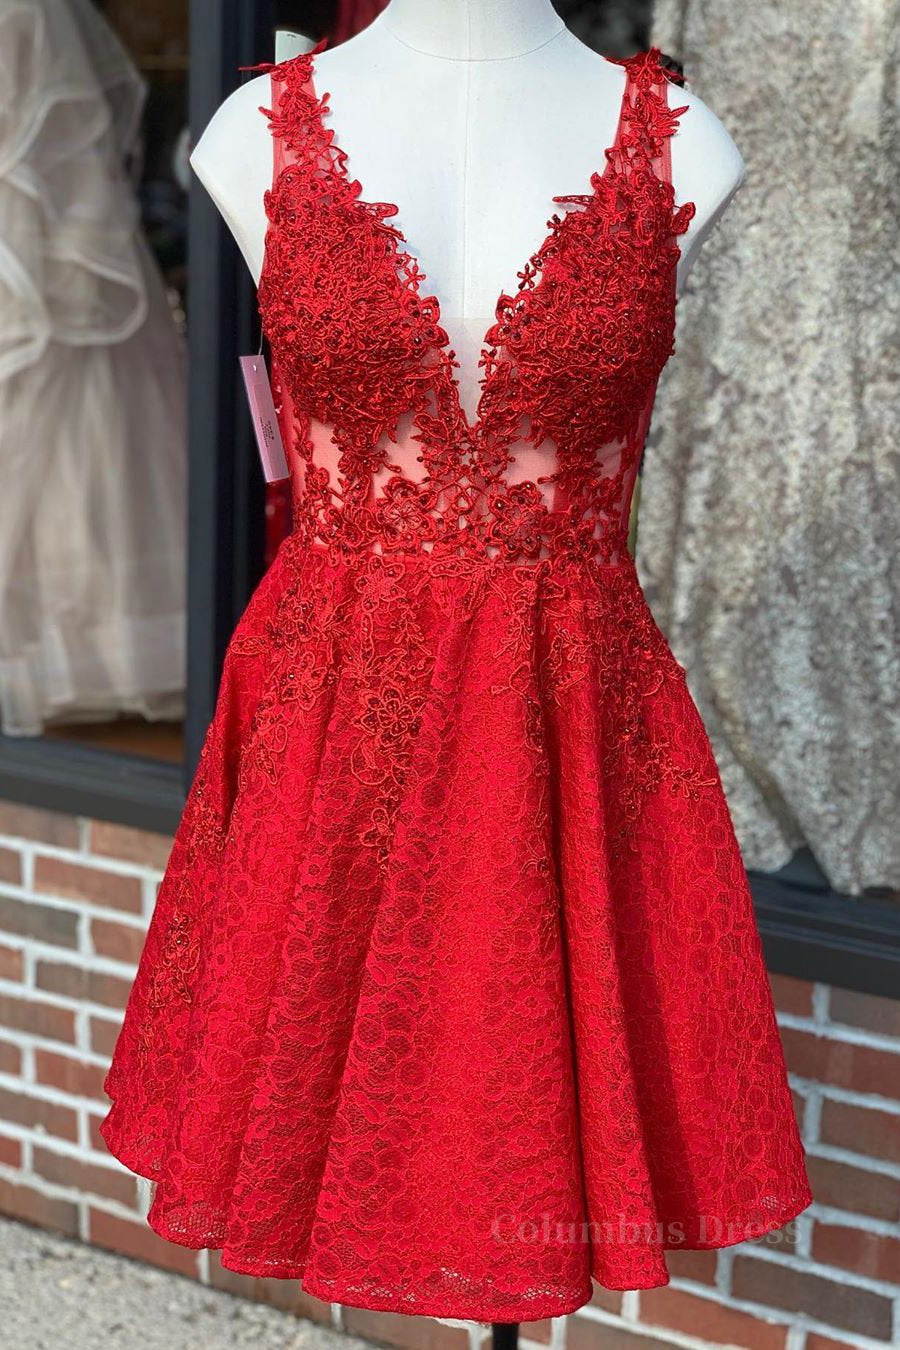 A Line V Neck Short Red Lace Corset Prom Dress, Red Lace Corset Formal Graduation Corset Homecoming Dress outfit, Formal Dresses For Large Ladies